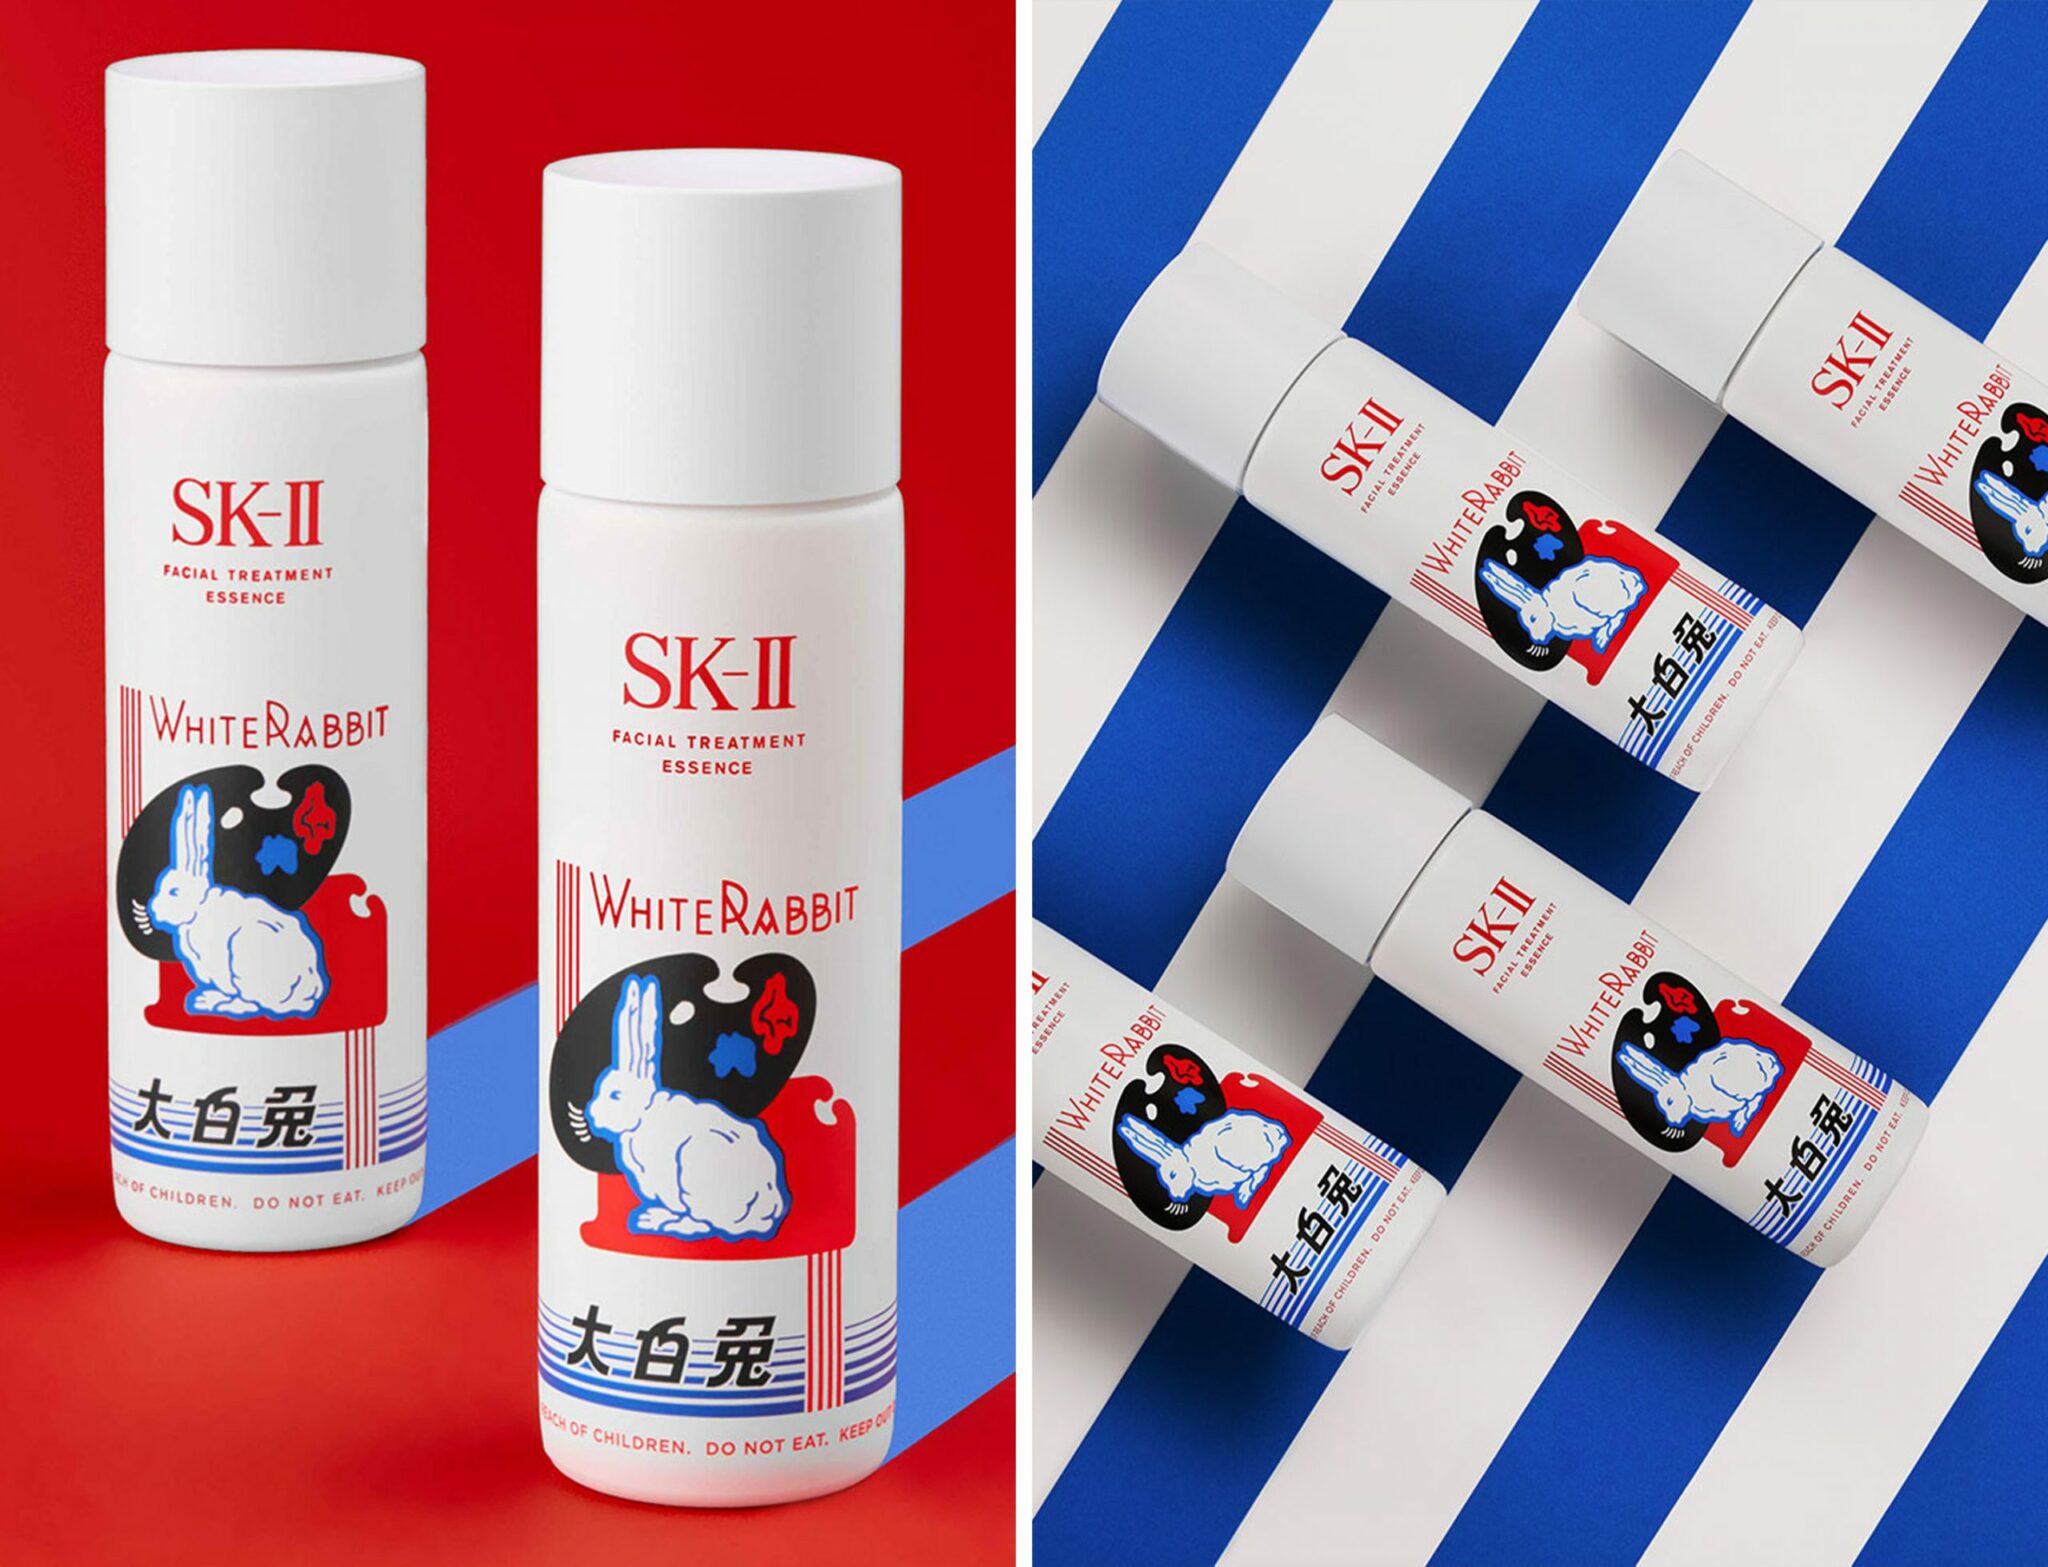 SK-II and Great White Rabbit IP Collaboration for Chinese new year ...